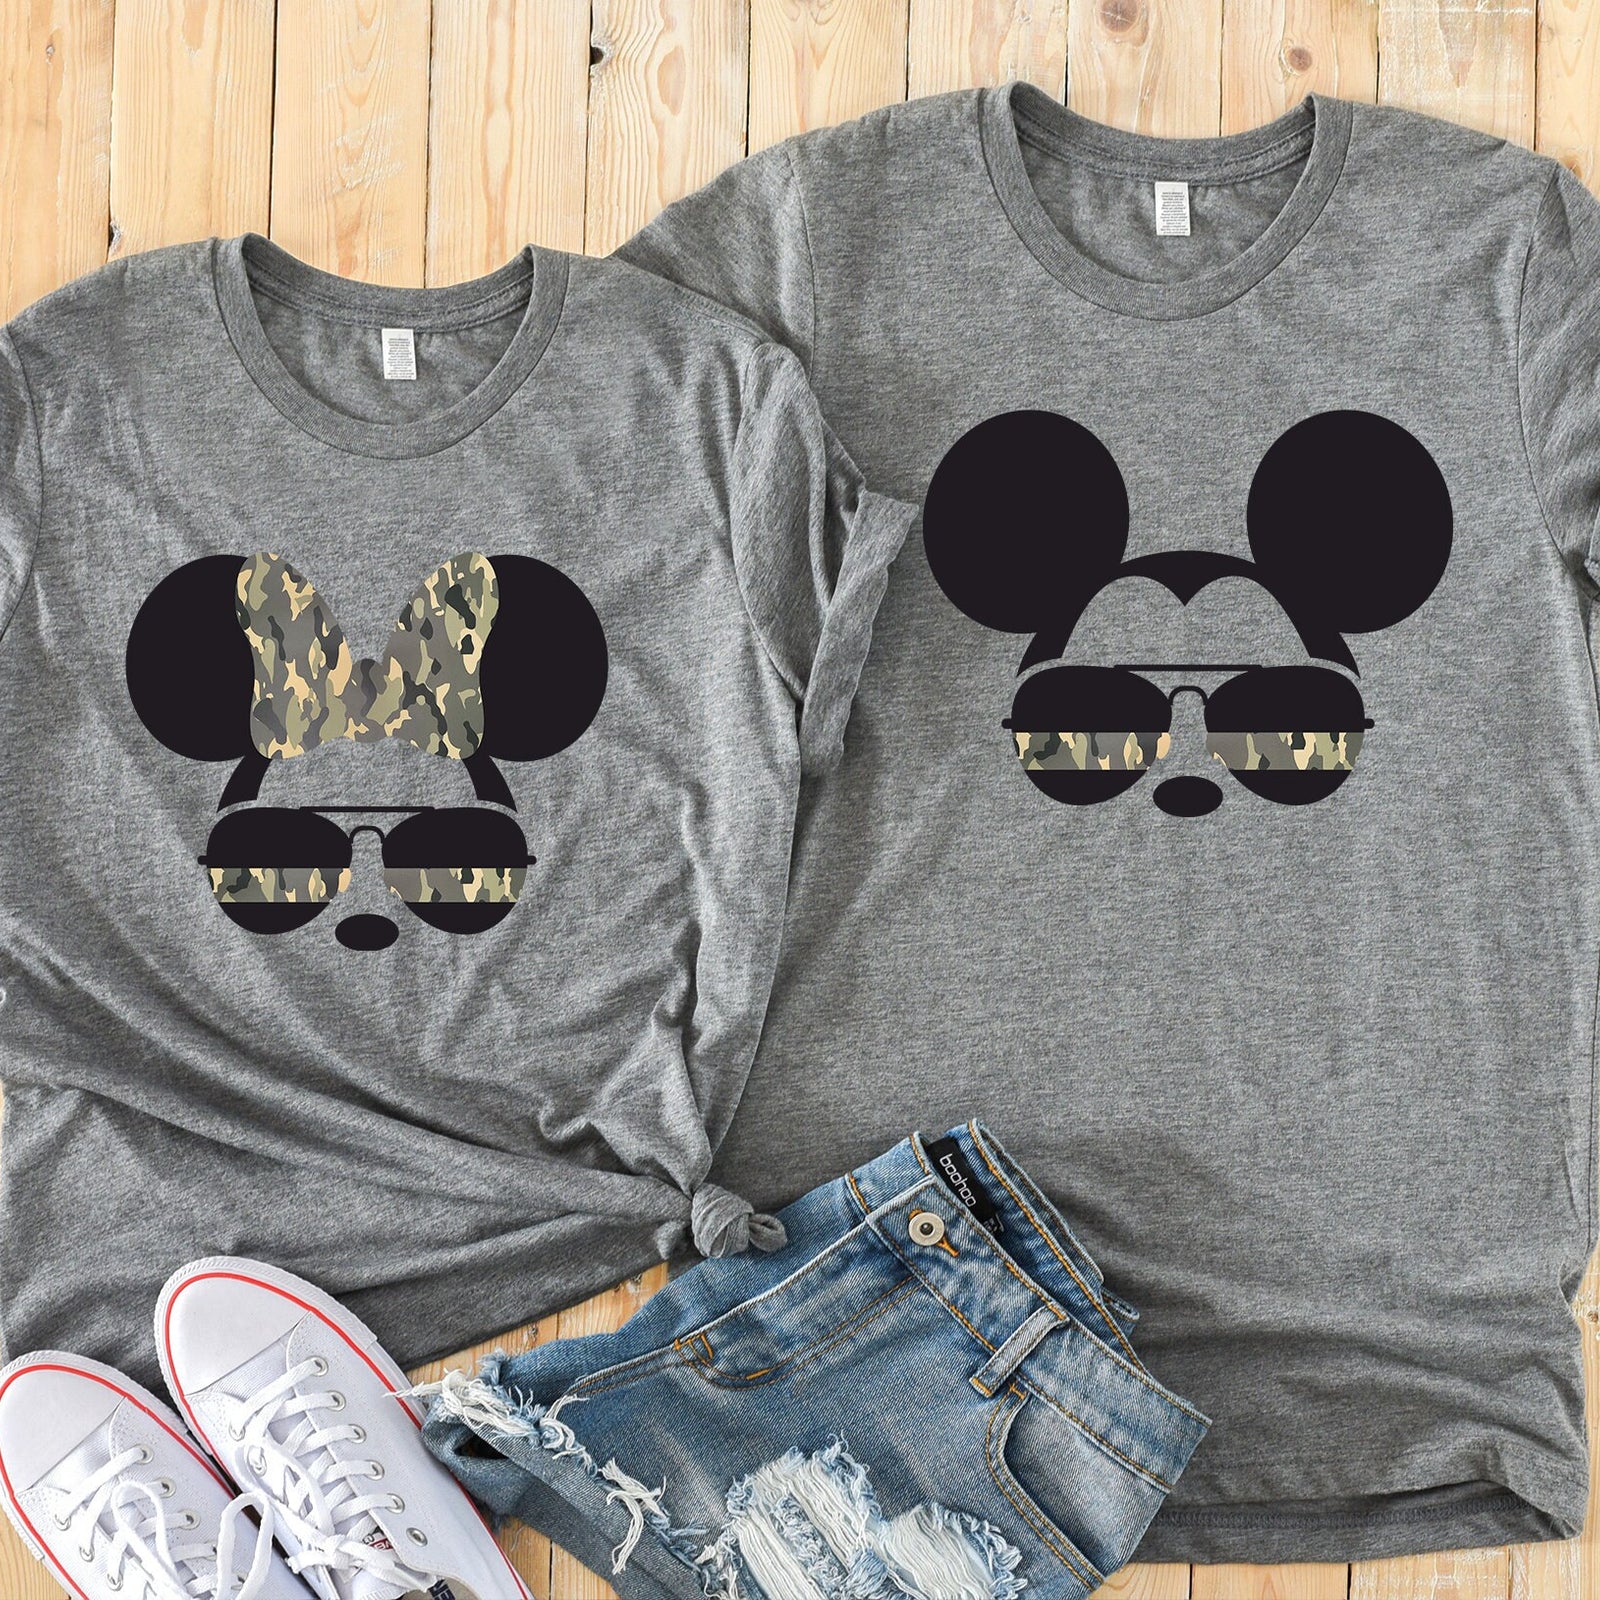 Minnie and Mickey Army Camouflaged Aviator Glasses Adult Shirts - Disney Couples - Military Matching Shirts - Armed Forces